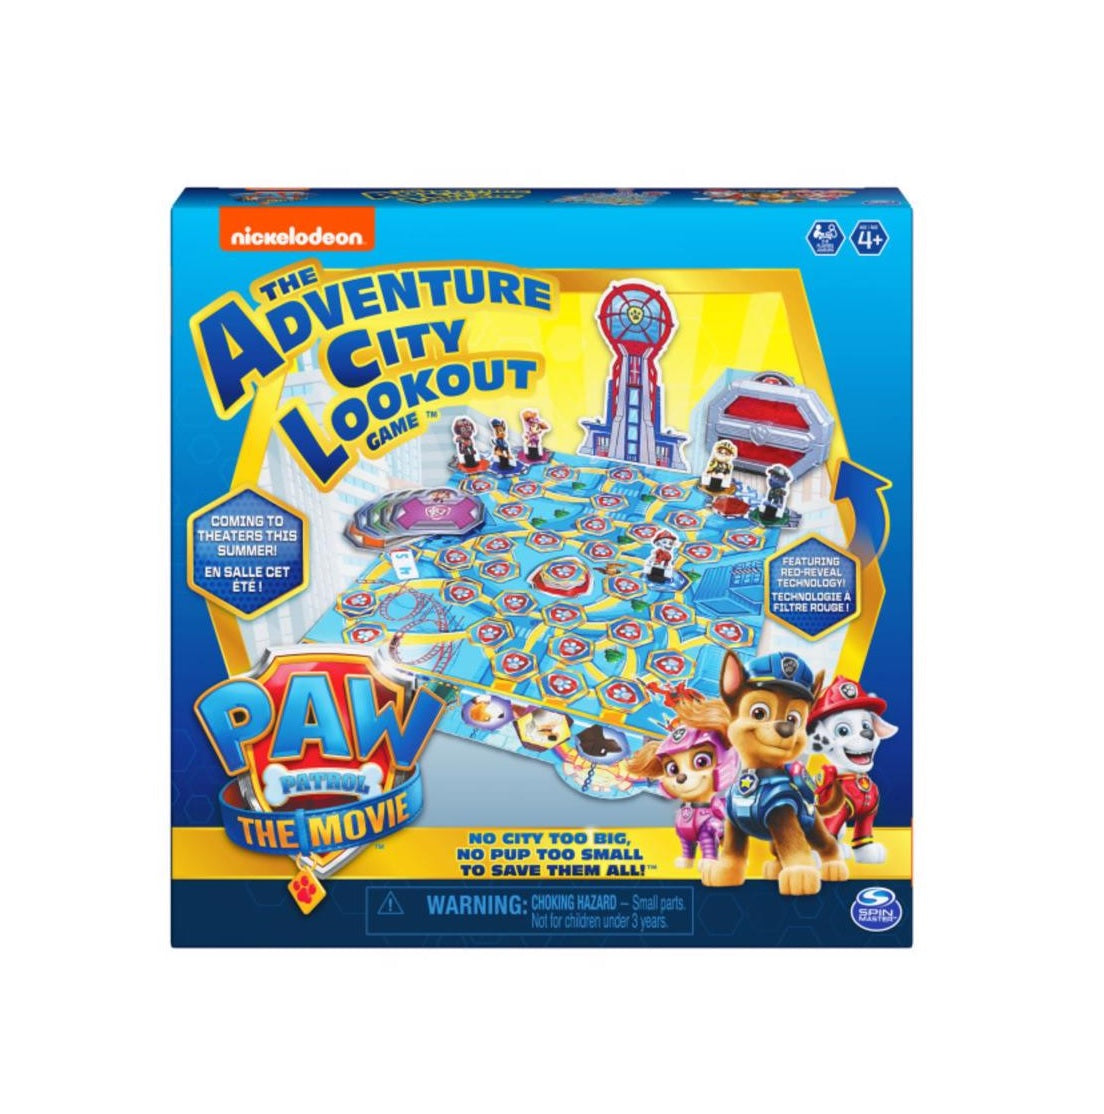 Spin Master 6061254 Paw Patrol Board Game, Multicolored